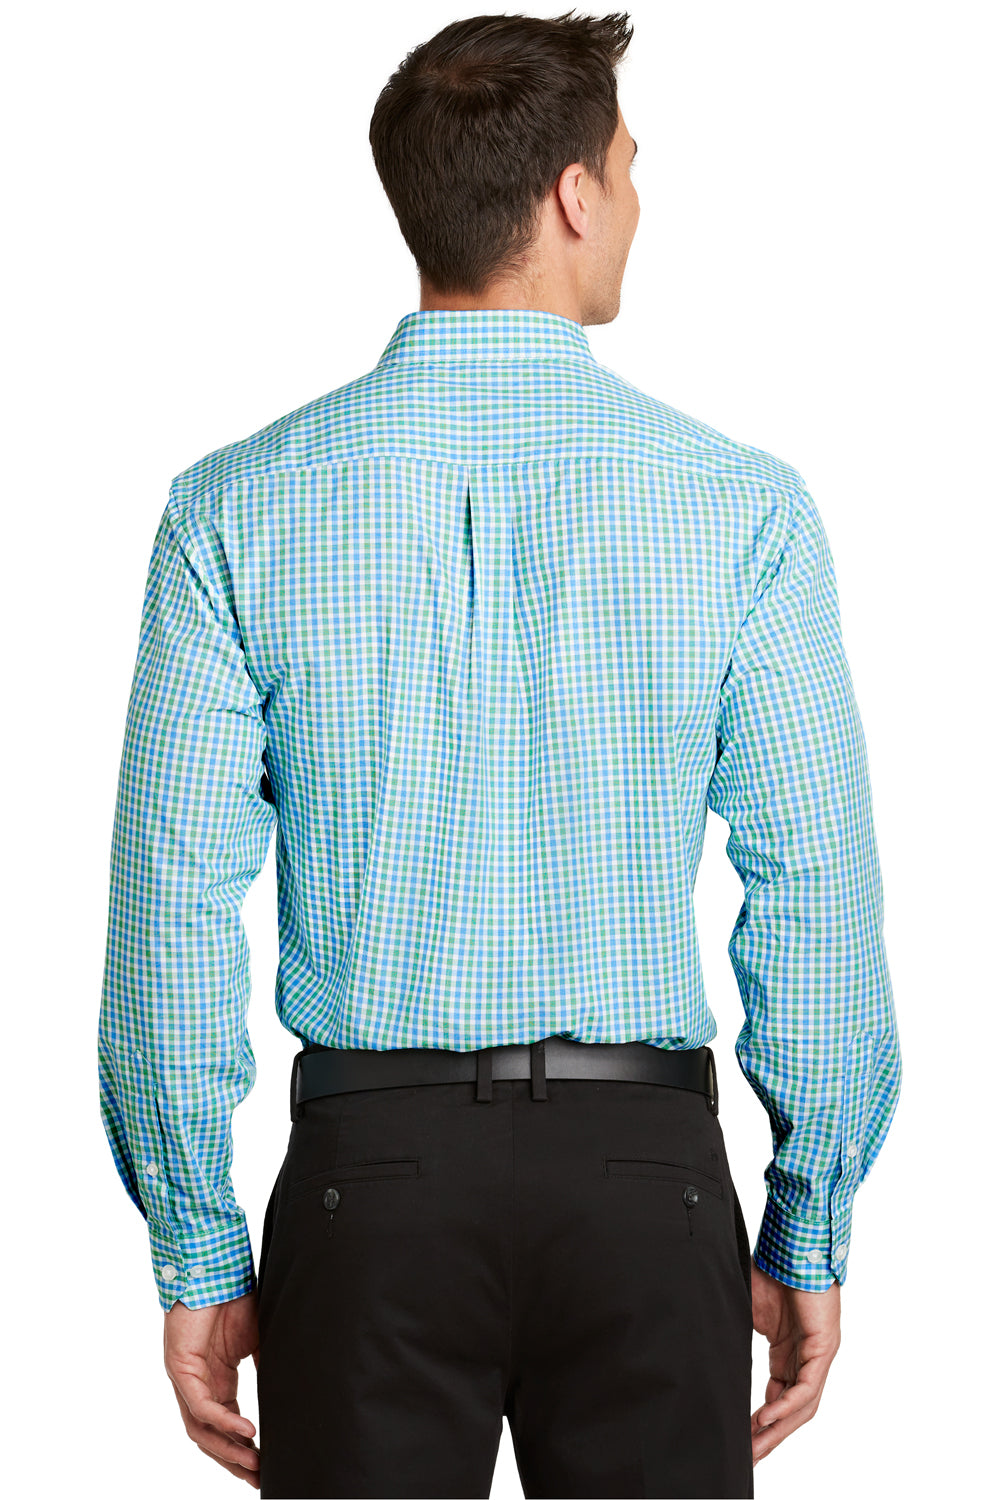 Port Authority S654 Mens Easy Care Wrinkle Resistant Long Sleeve Button Down Shirt w/ Pocket Green/Aqua Blue Back